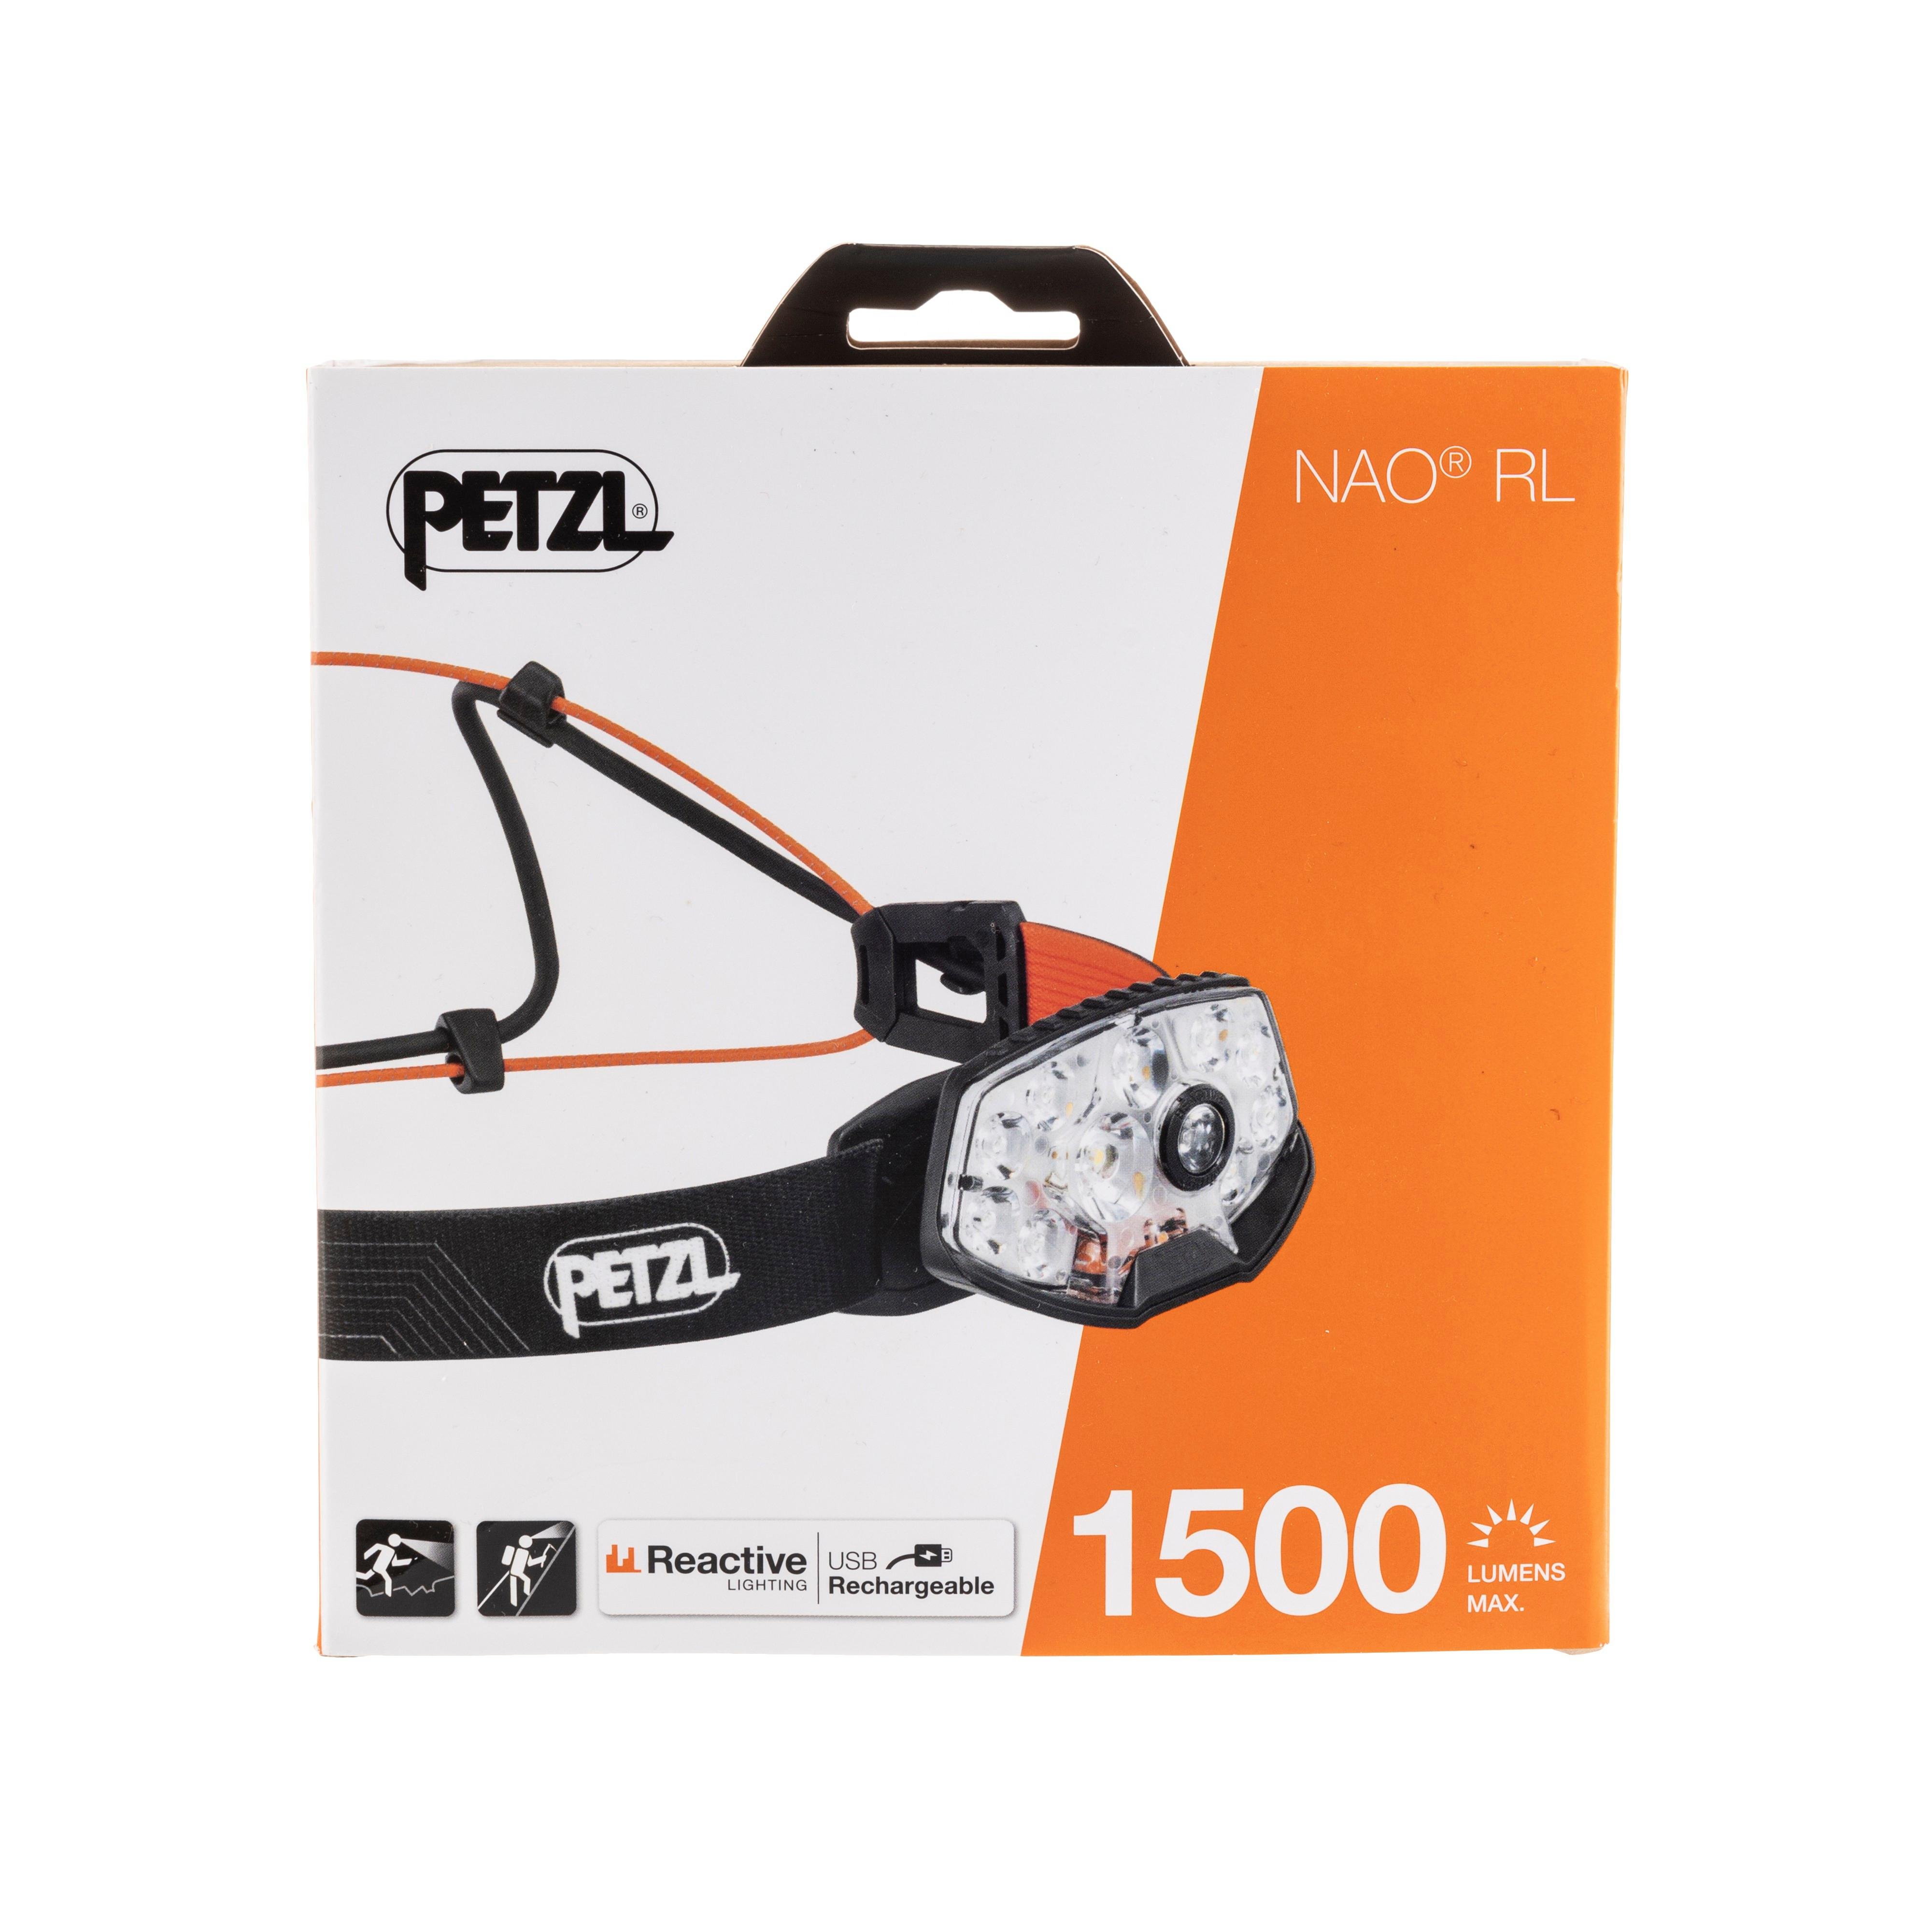 Lampe frontale Petzl Nao RL 1500 lm